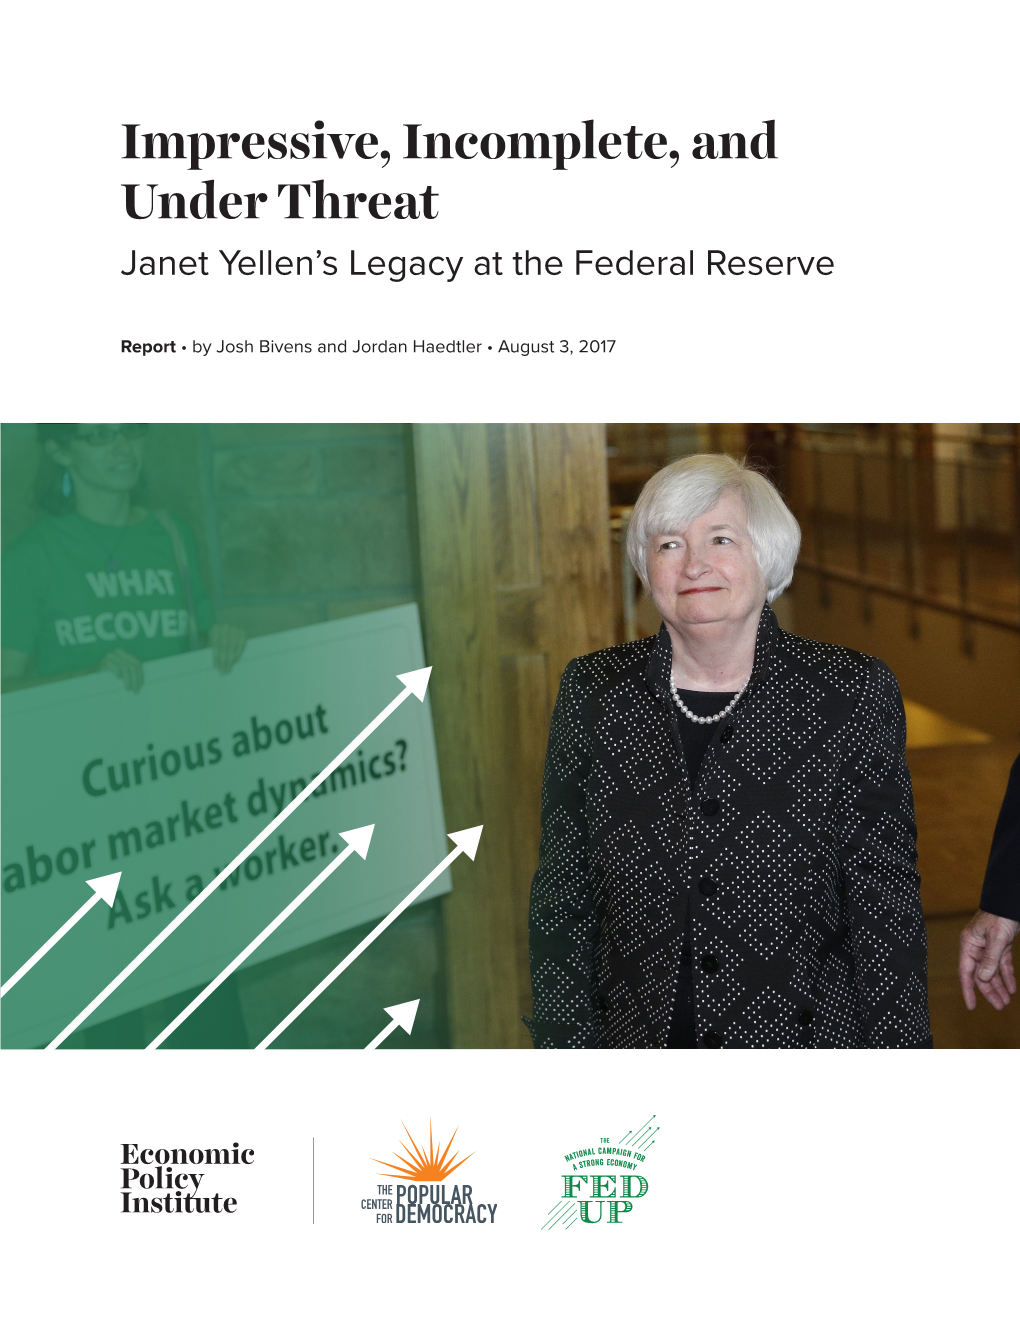 Janet Yellen's Legacy at the Federal Reserve